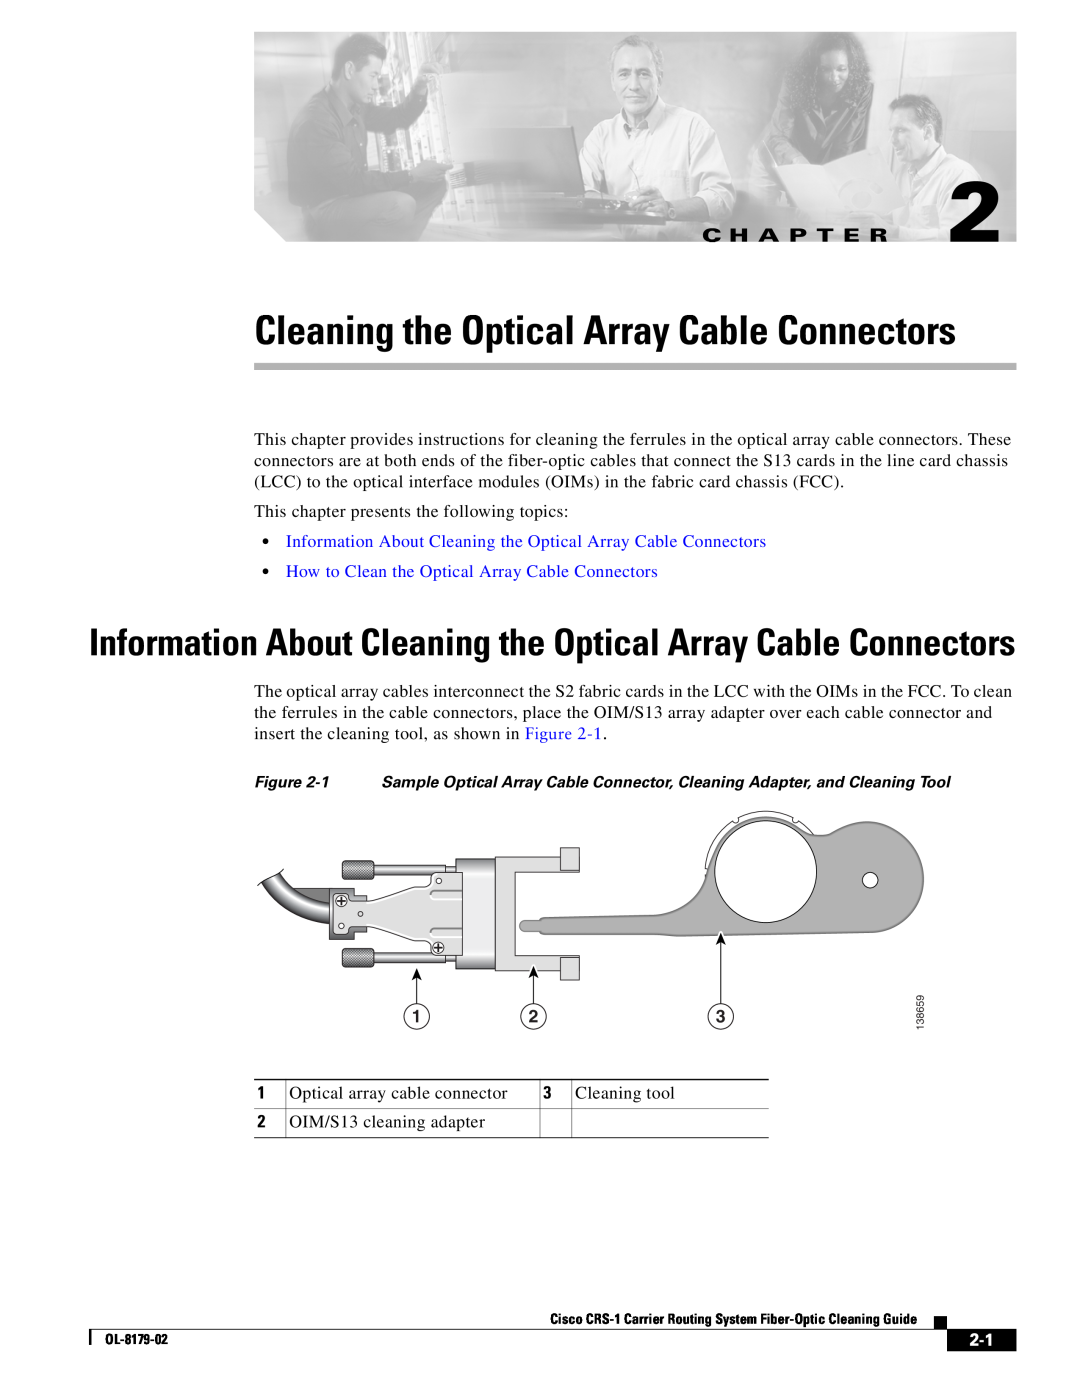 Cisco Systems CRS-1 manual •How to Clean the Optical Array Cable Connectors, Optical array cable connector, Cleaning tool 